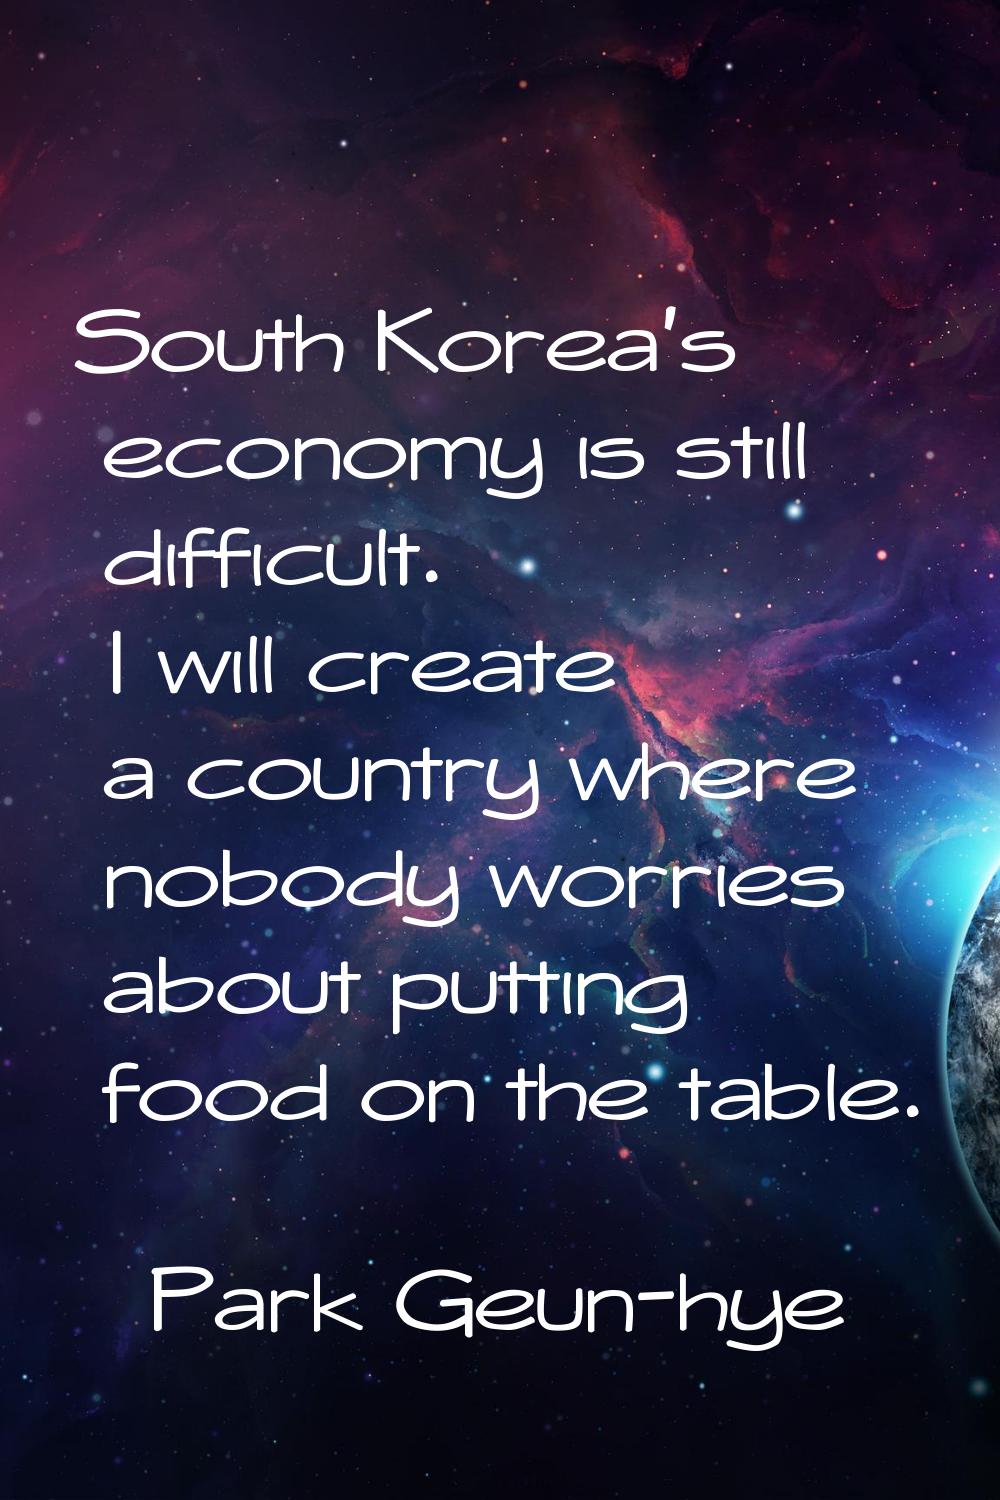 South Korea's economy is still difficult. I will create a country where nobody worries about puttin